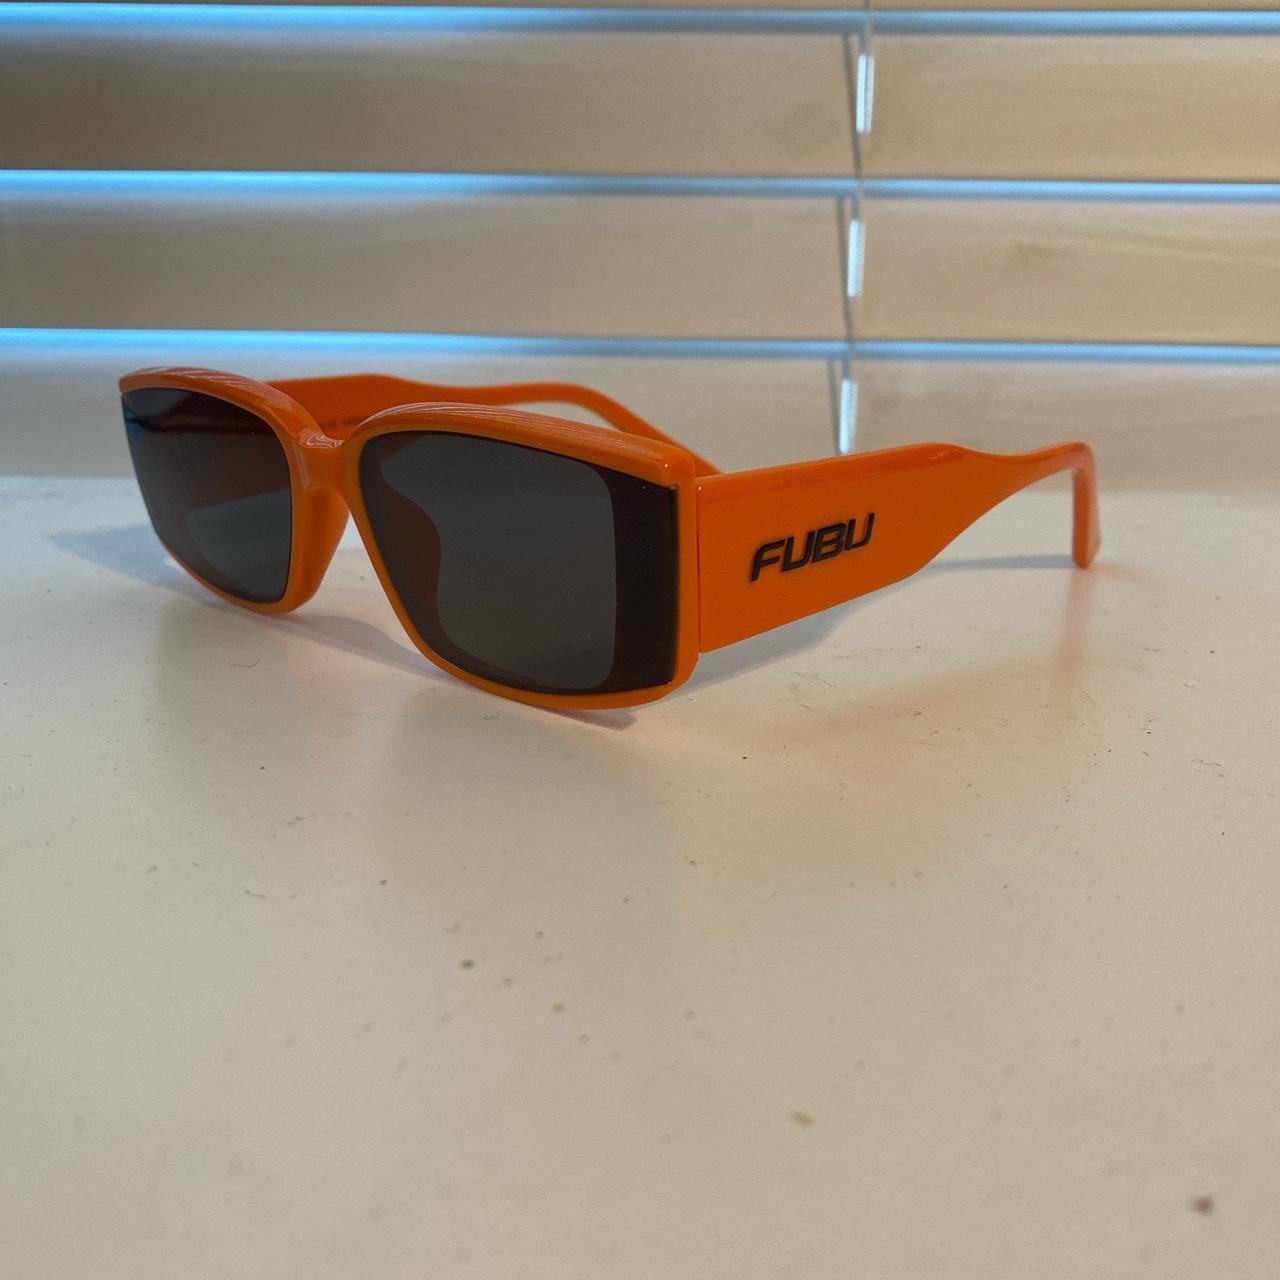 Early 2000 Style Sunglasses Made By... - Depop